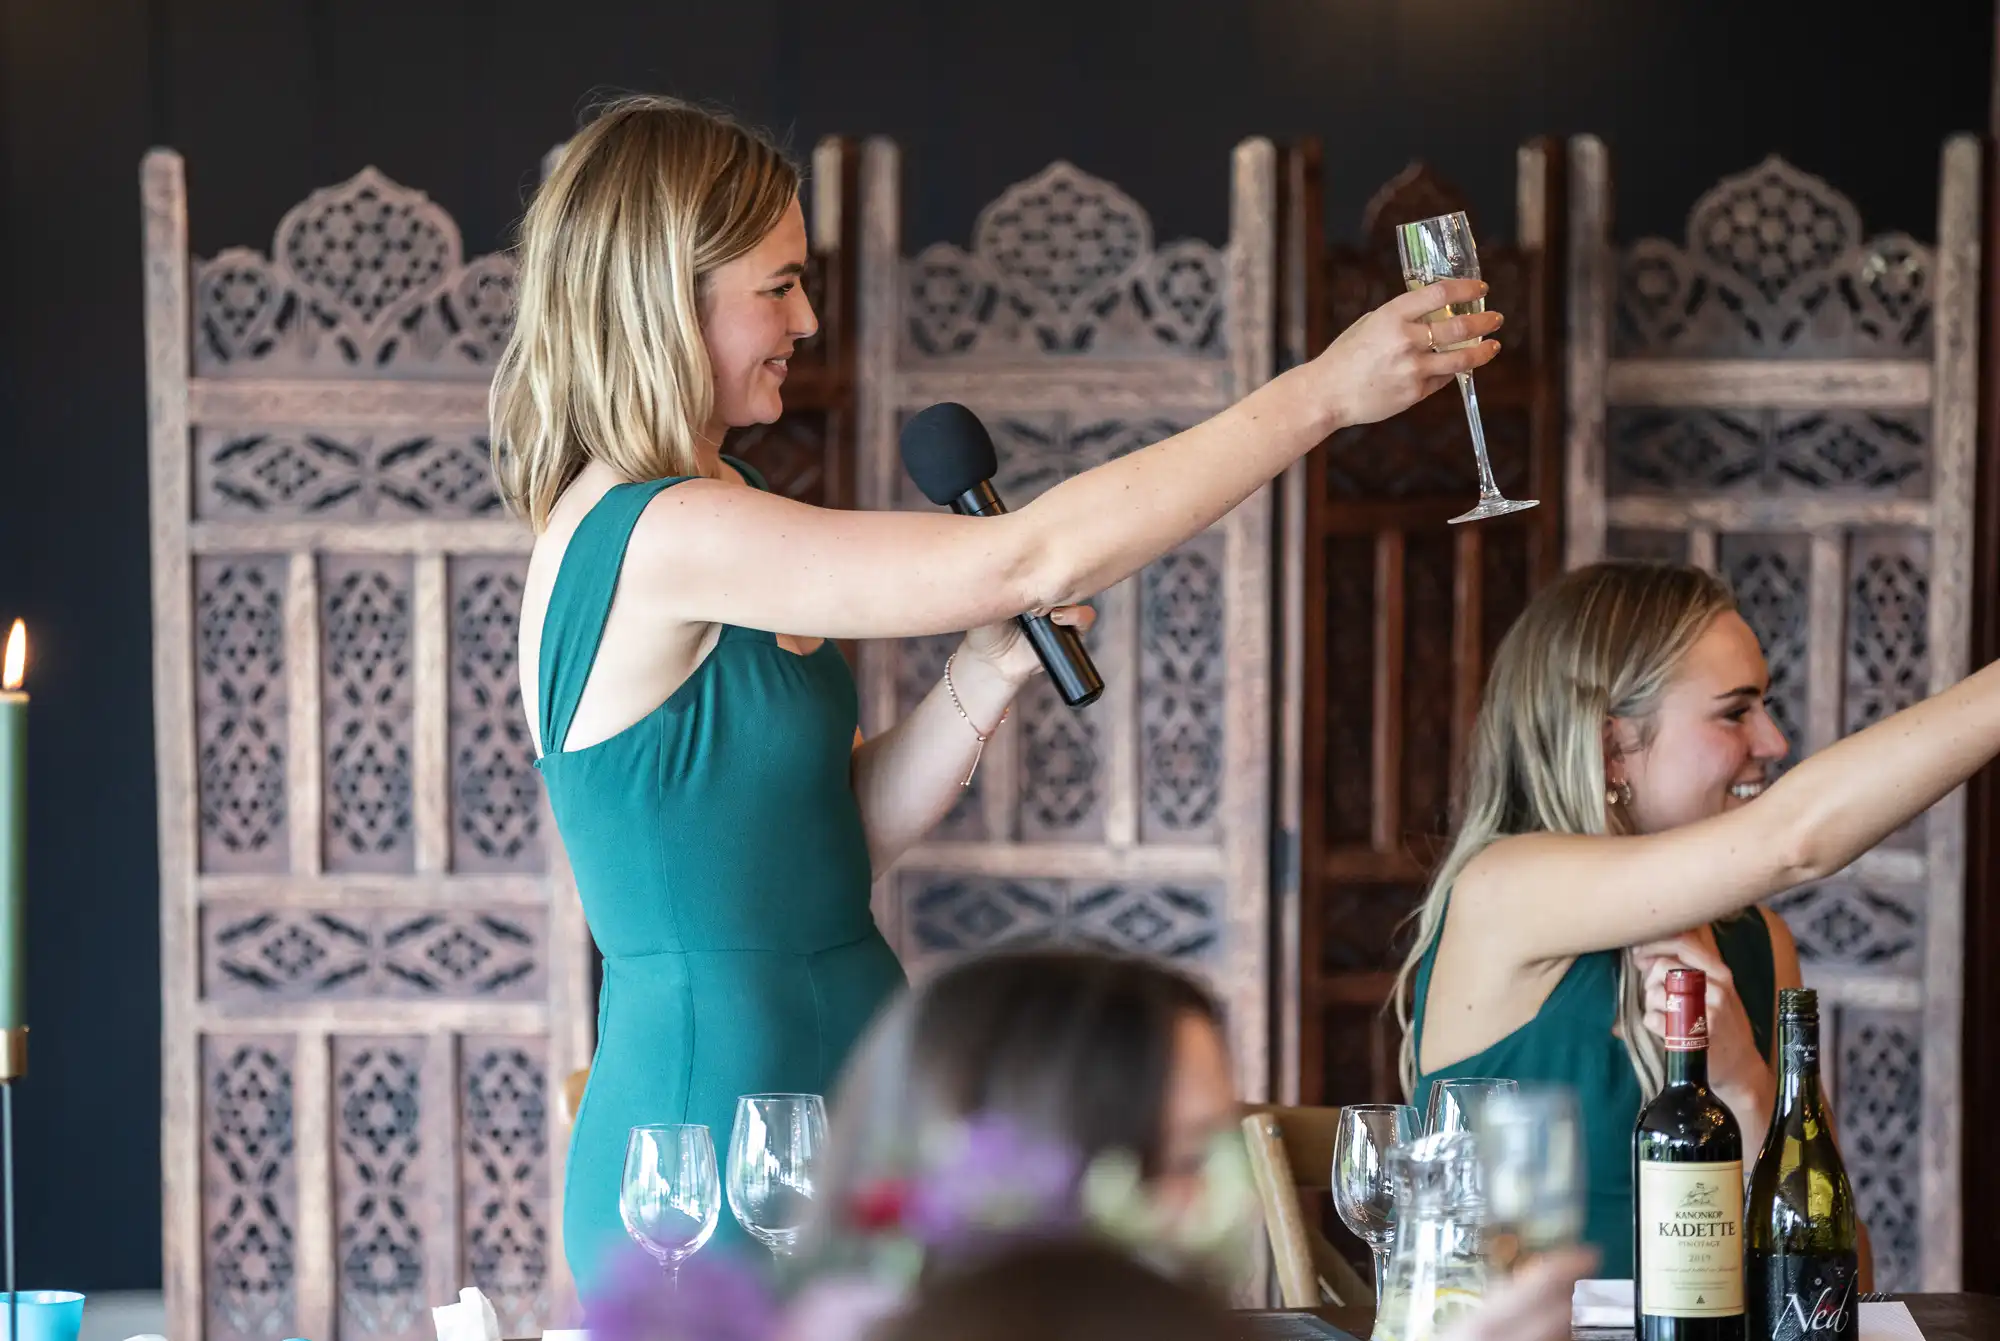 A woman in a green dress holds a microphone and raises a glass for a toast, while another woman in a similar dress also raises her glass at a dining table with bottles and glasses.